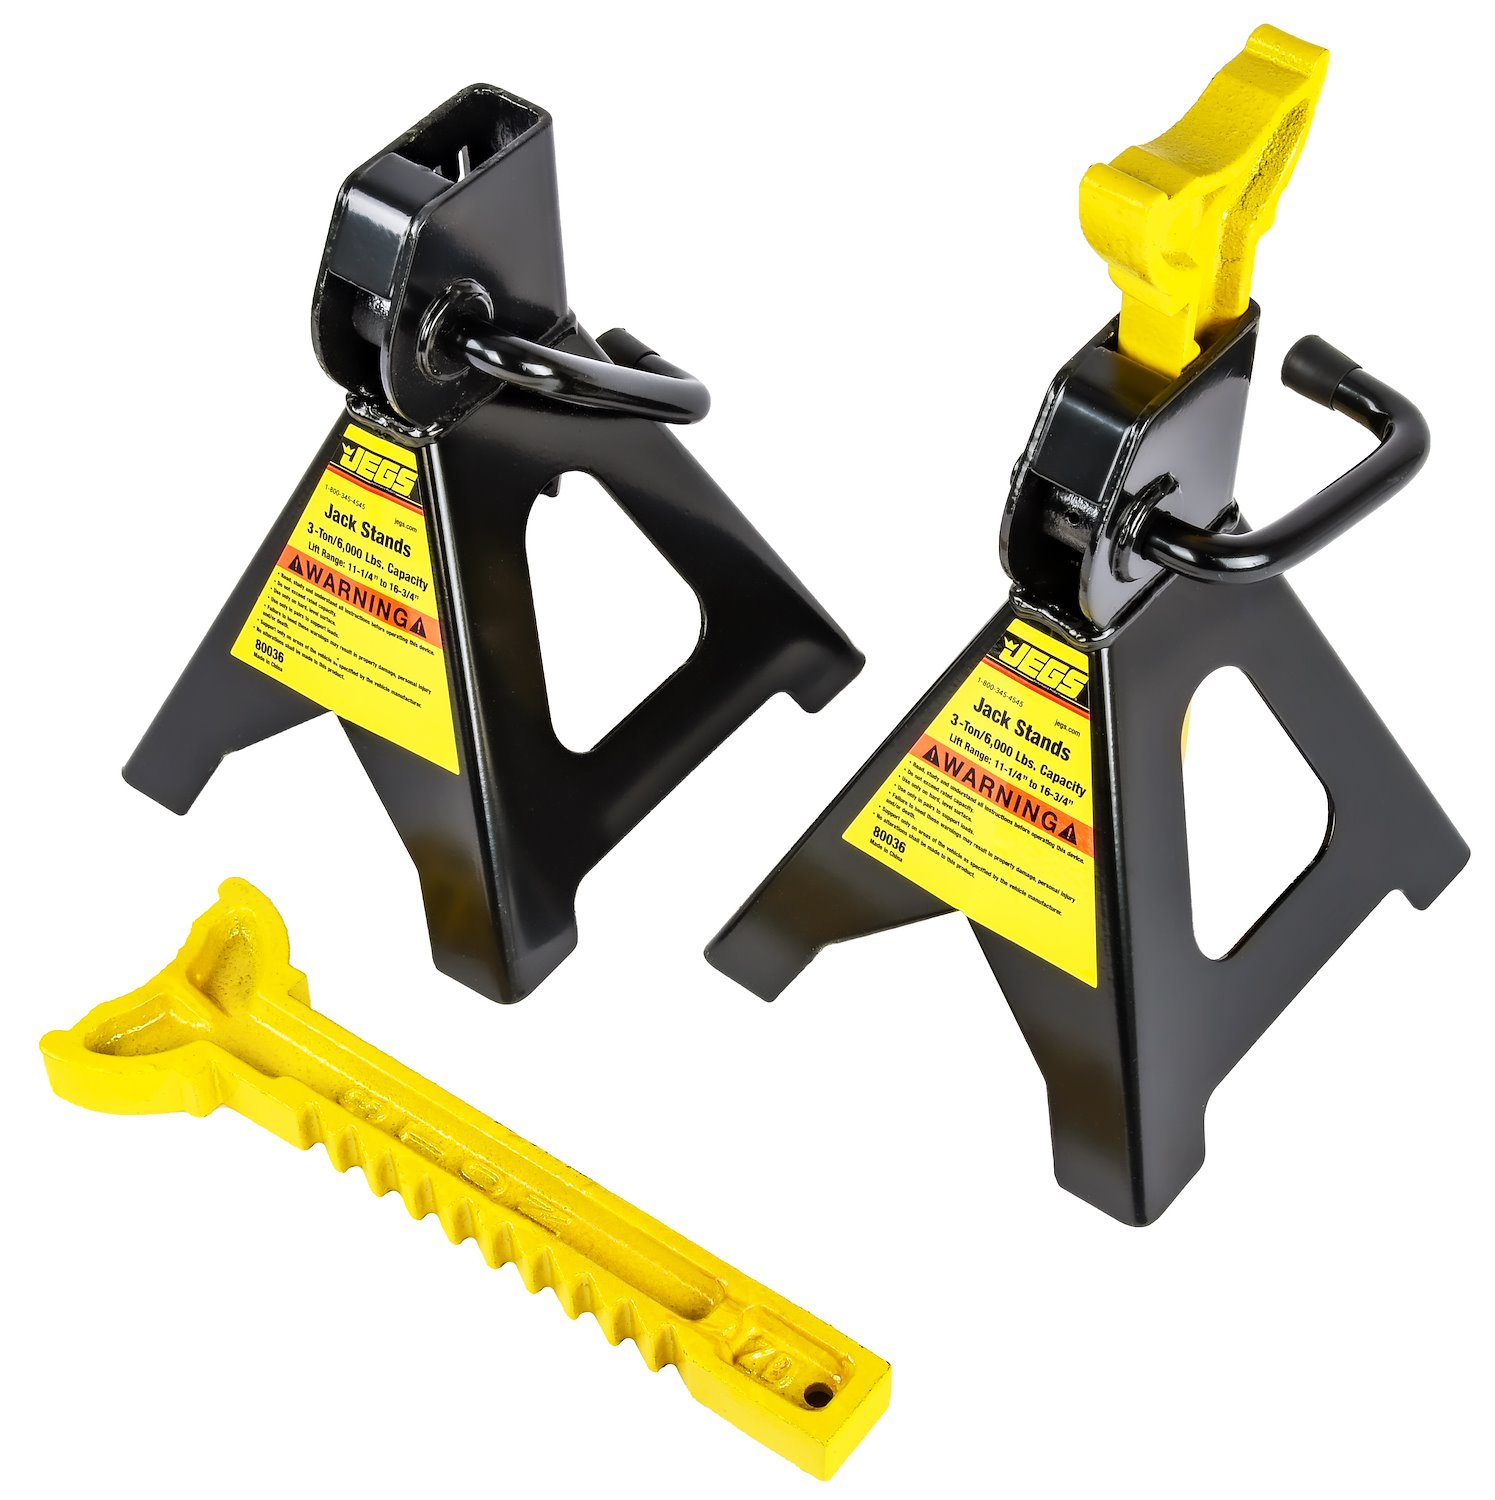 Jack Stands [3-Ton Capacity]